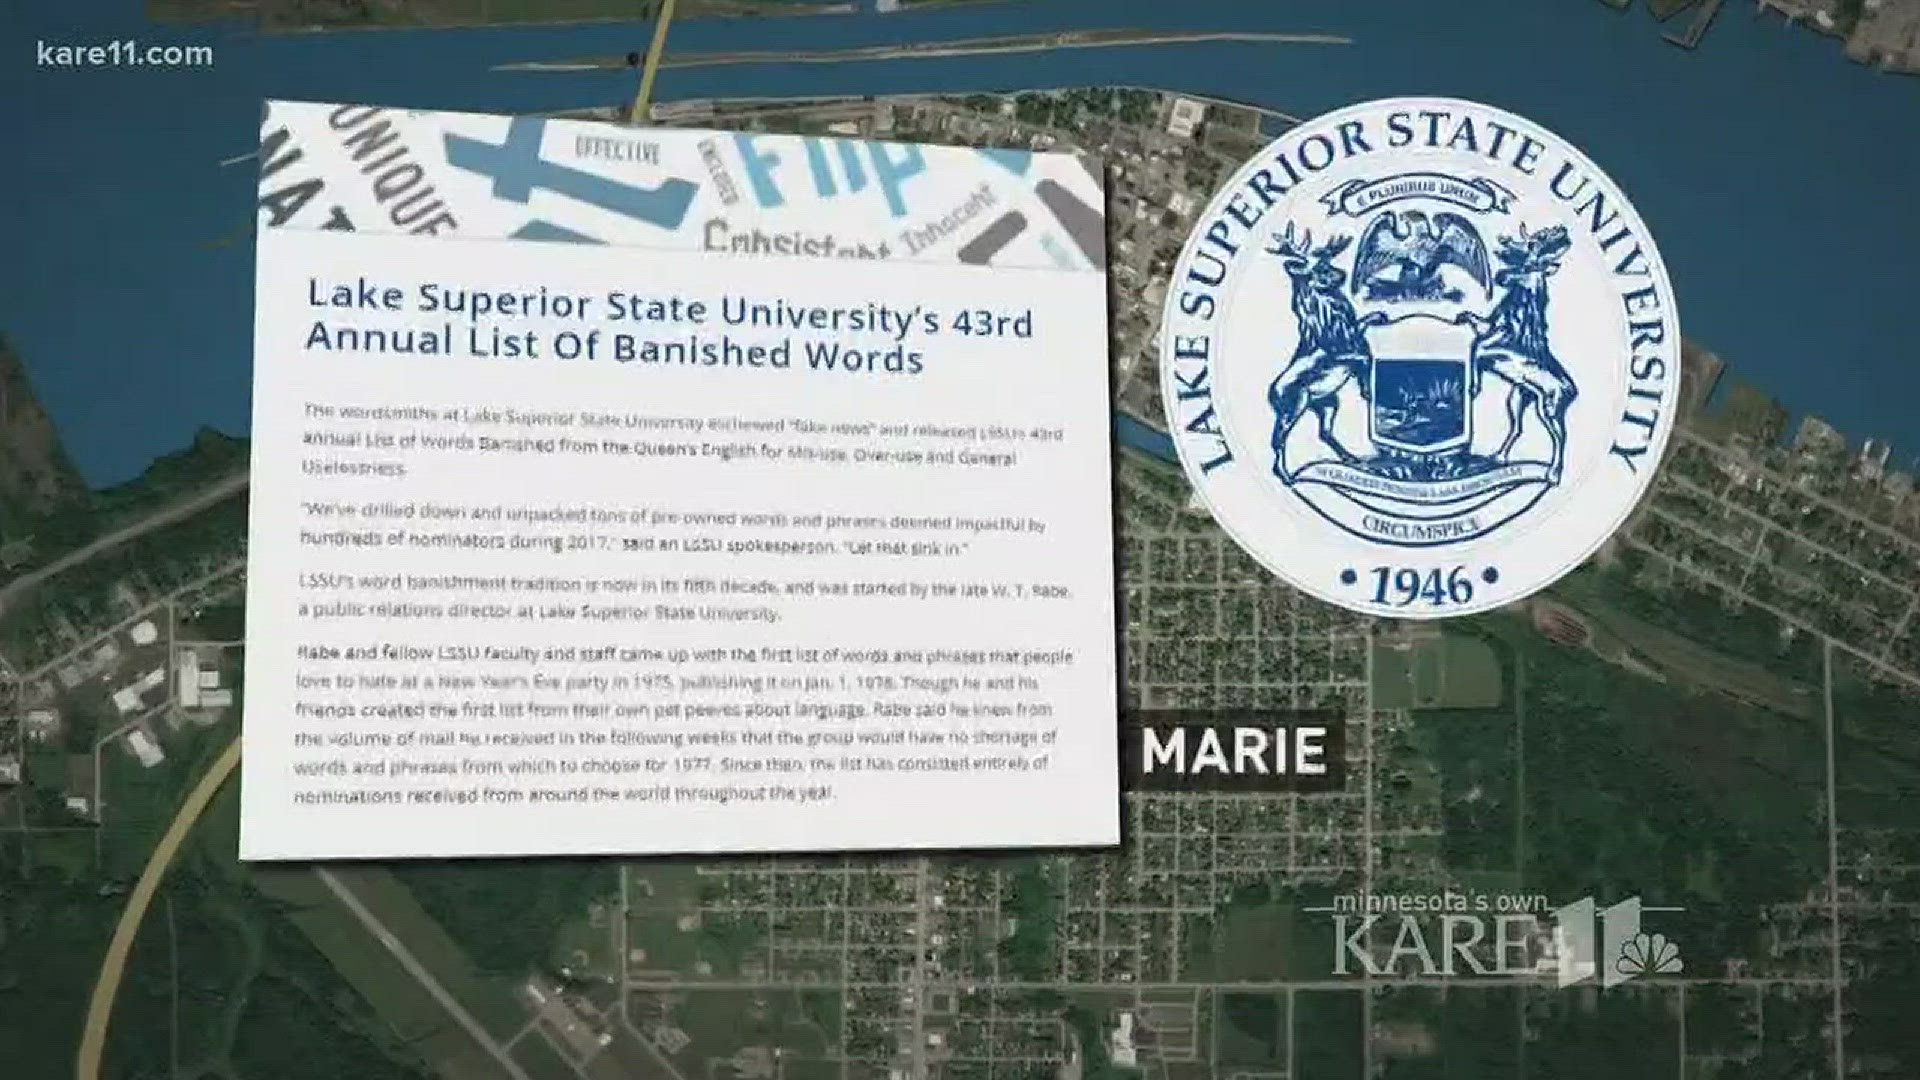 The self-proclaimed "wordsmiths" at Lake Superior State University have released their 43rd annual List of Words Banished from the Queen's English for Mis-use, Over-use and General Uselessness. http://kare11.tv/2lBZitC